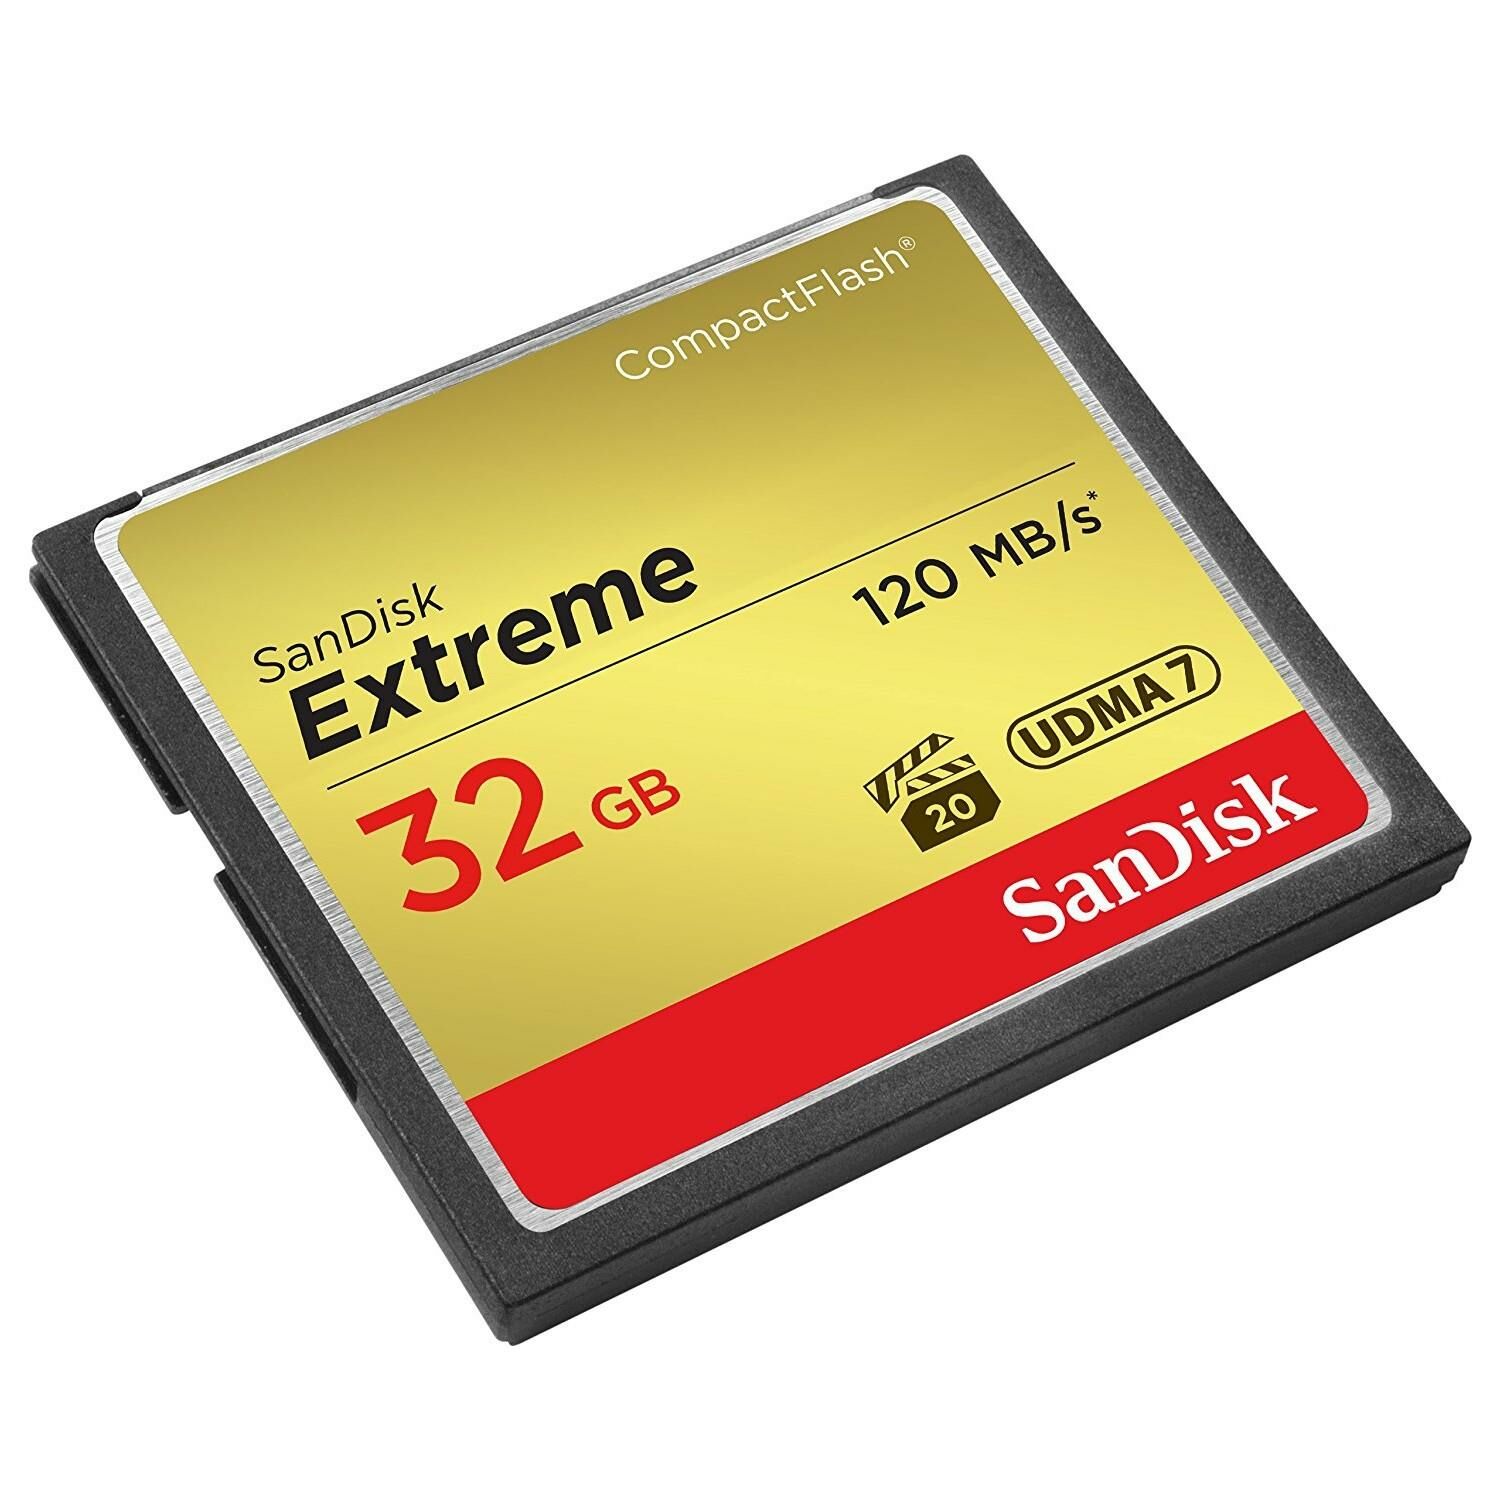 Sandisk Extreme Compact Flash Card 32GB 120MB/s 800x